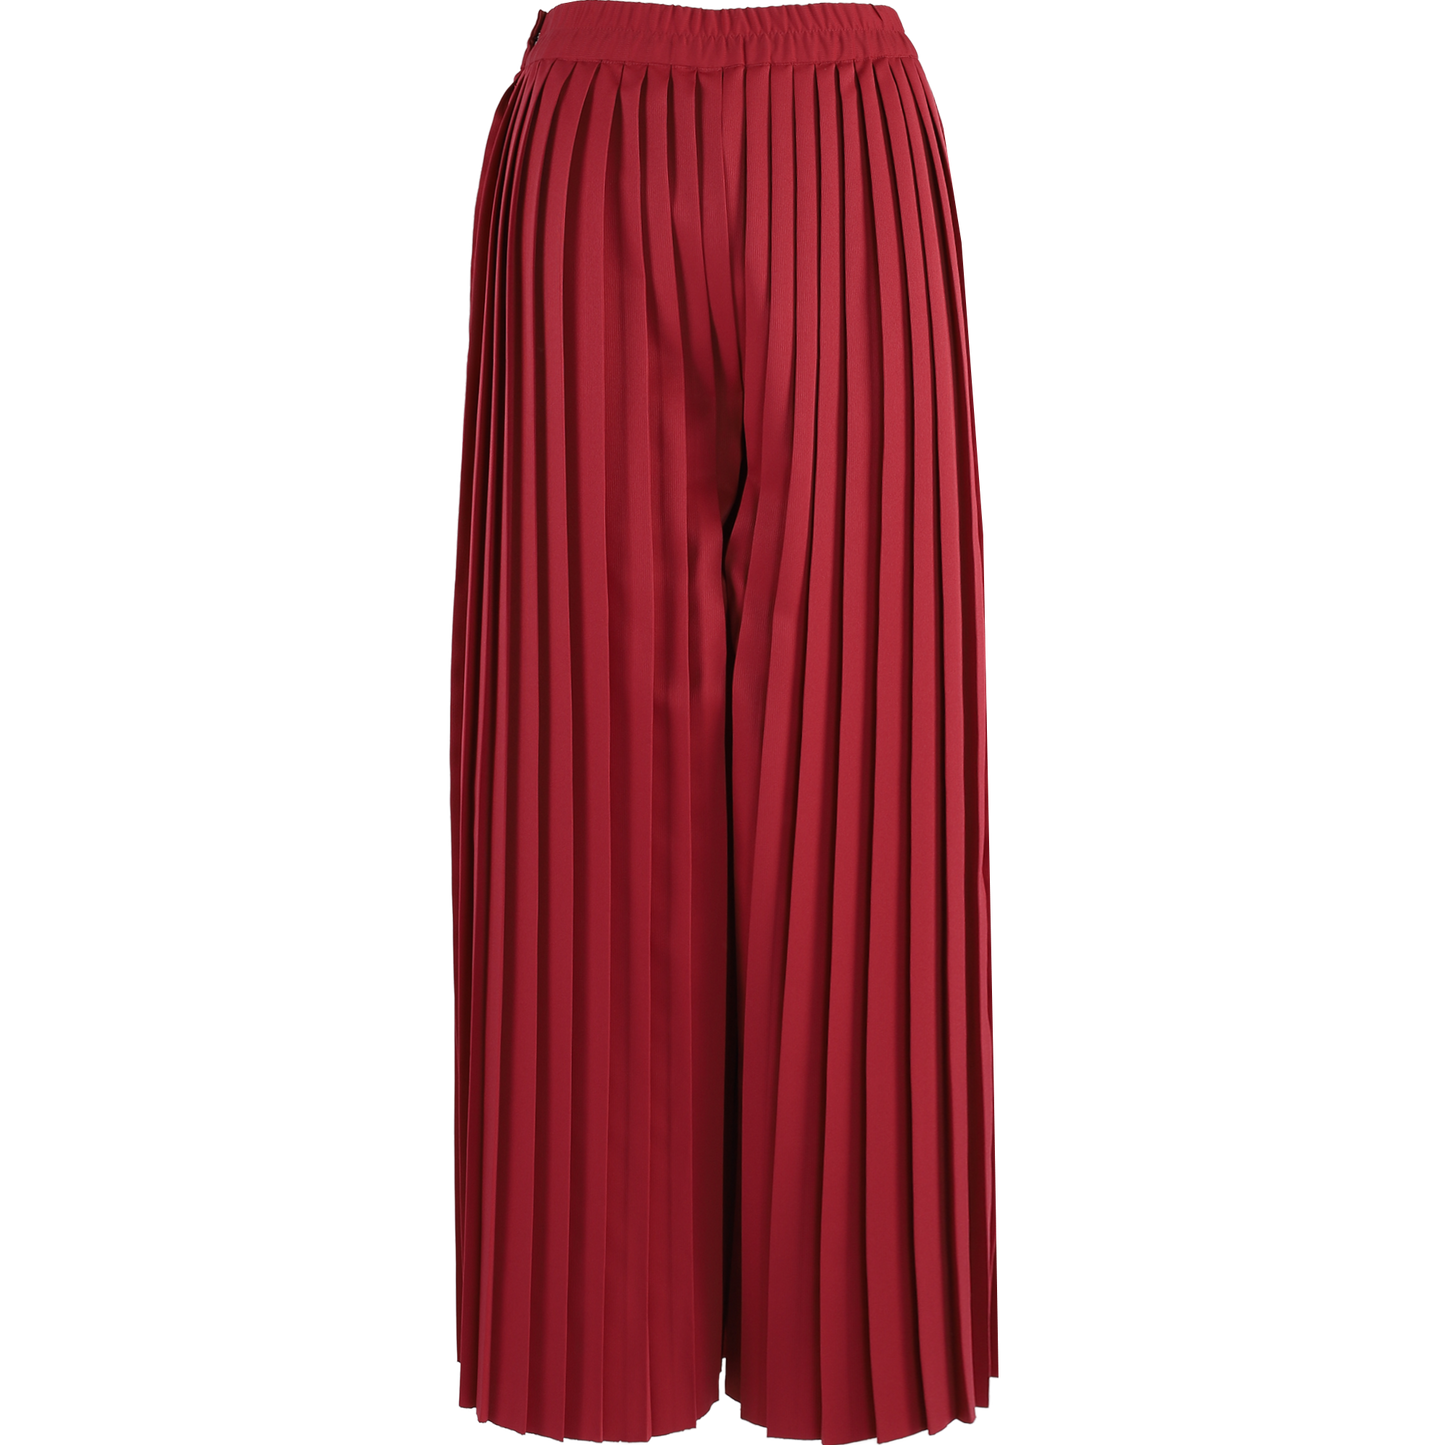 Red Pleated Palazzo Pants for Female Frontline Associate — Uniforms by CYC Corporate Label